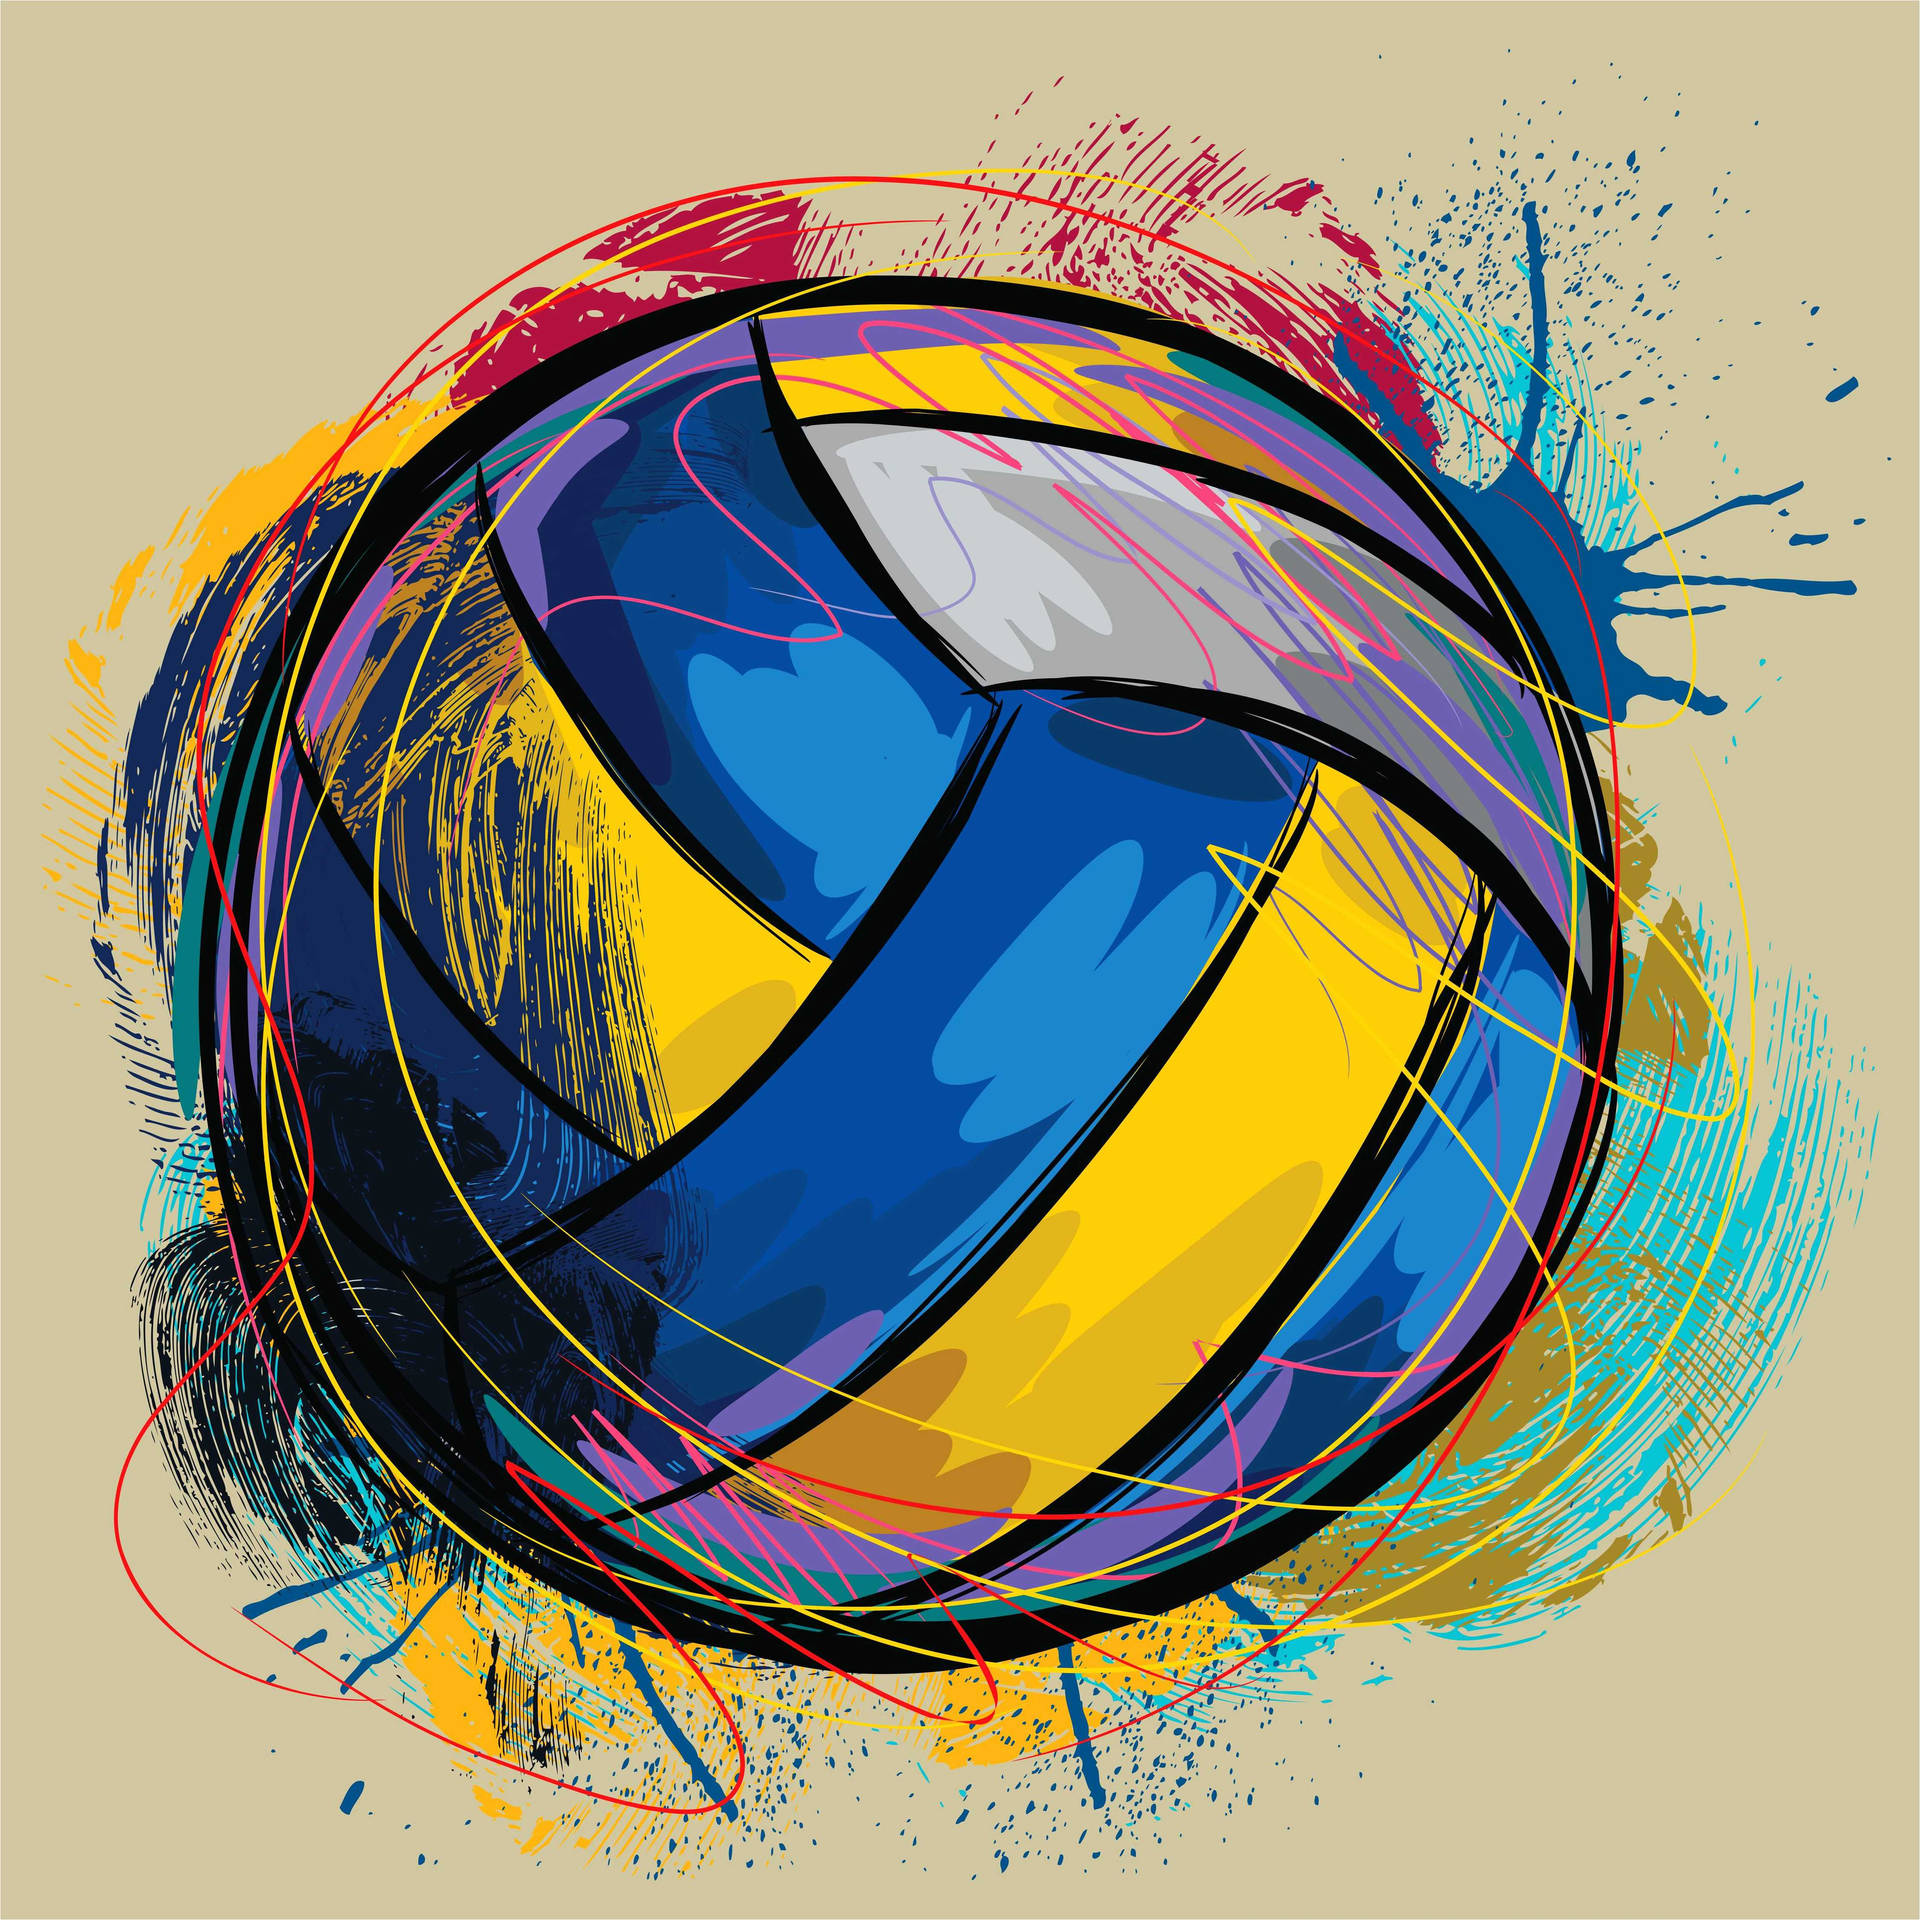 Download Volleyball Aesthetic Colorful Digital Art Wallpaper ...